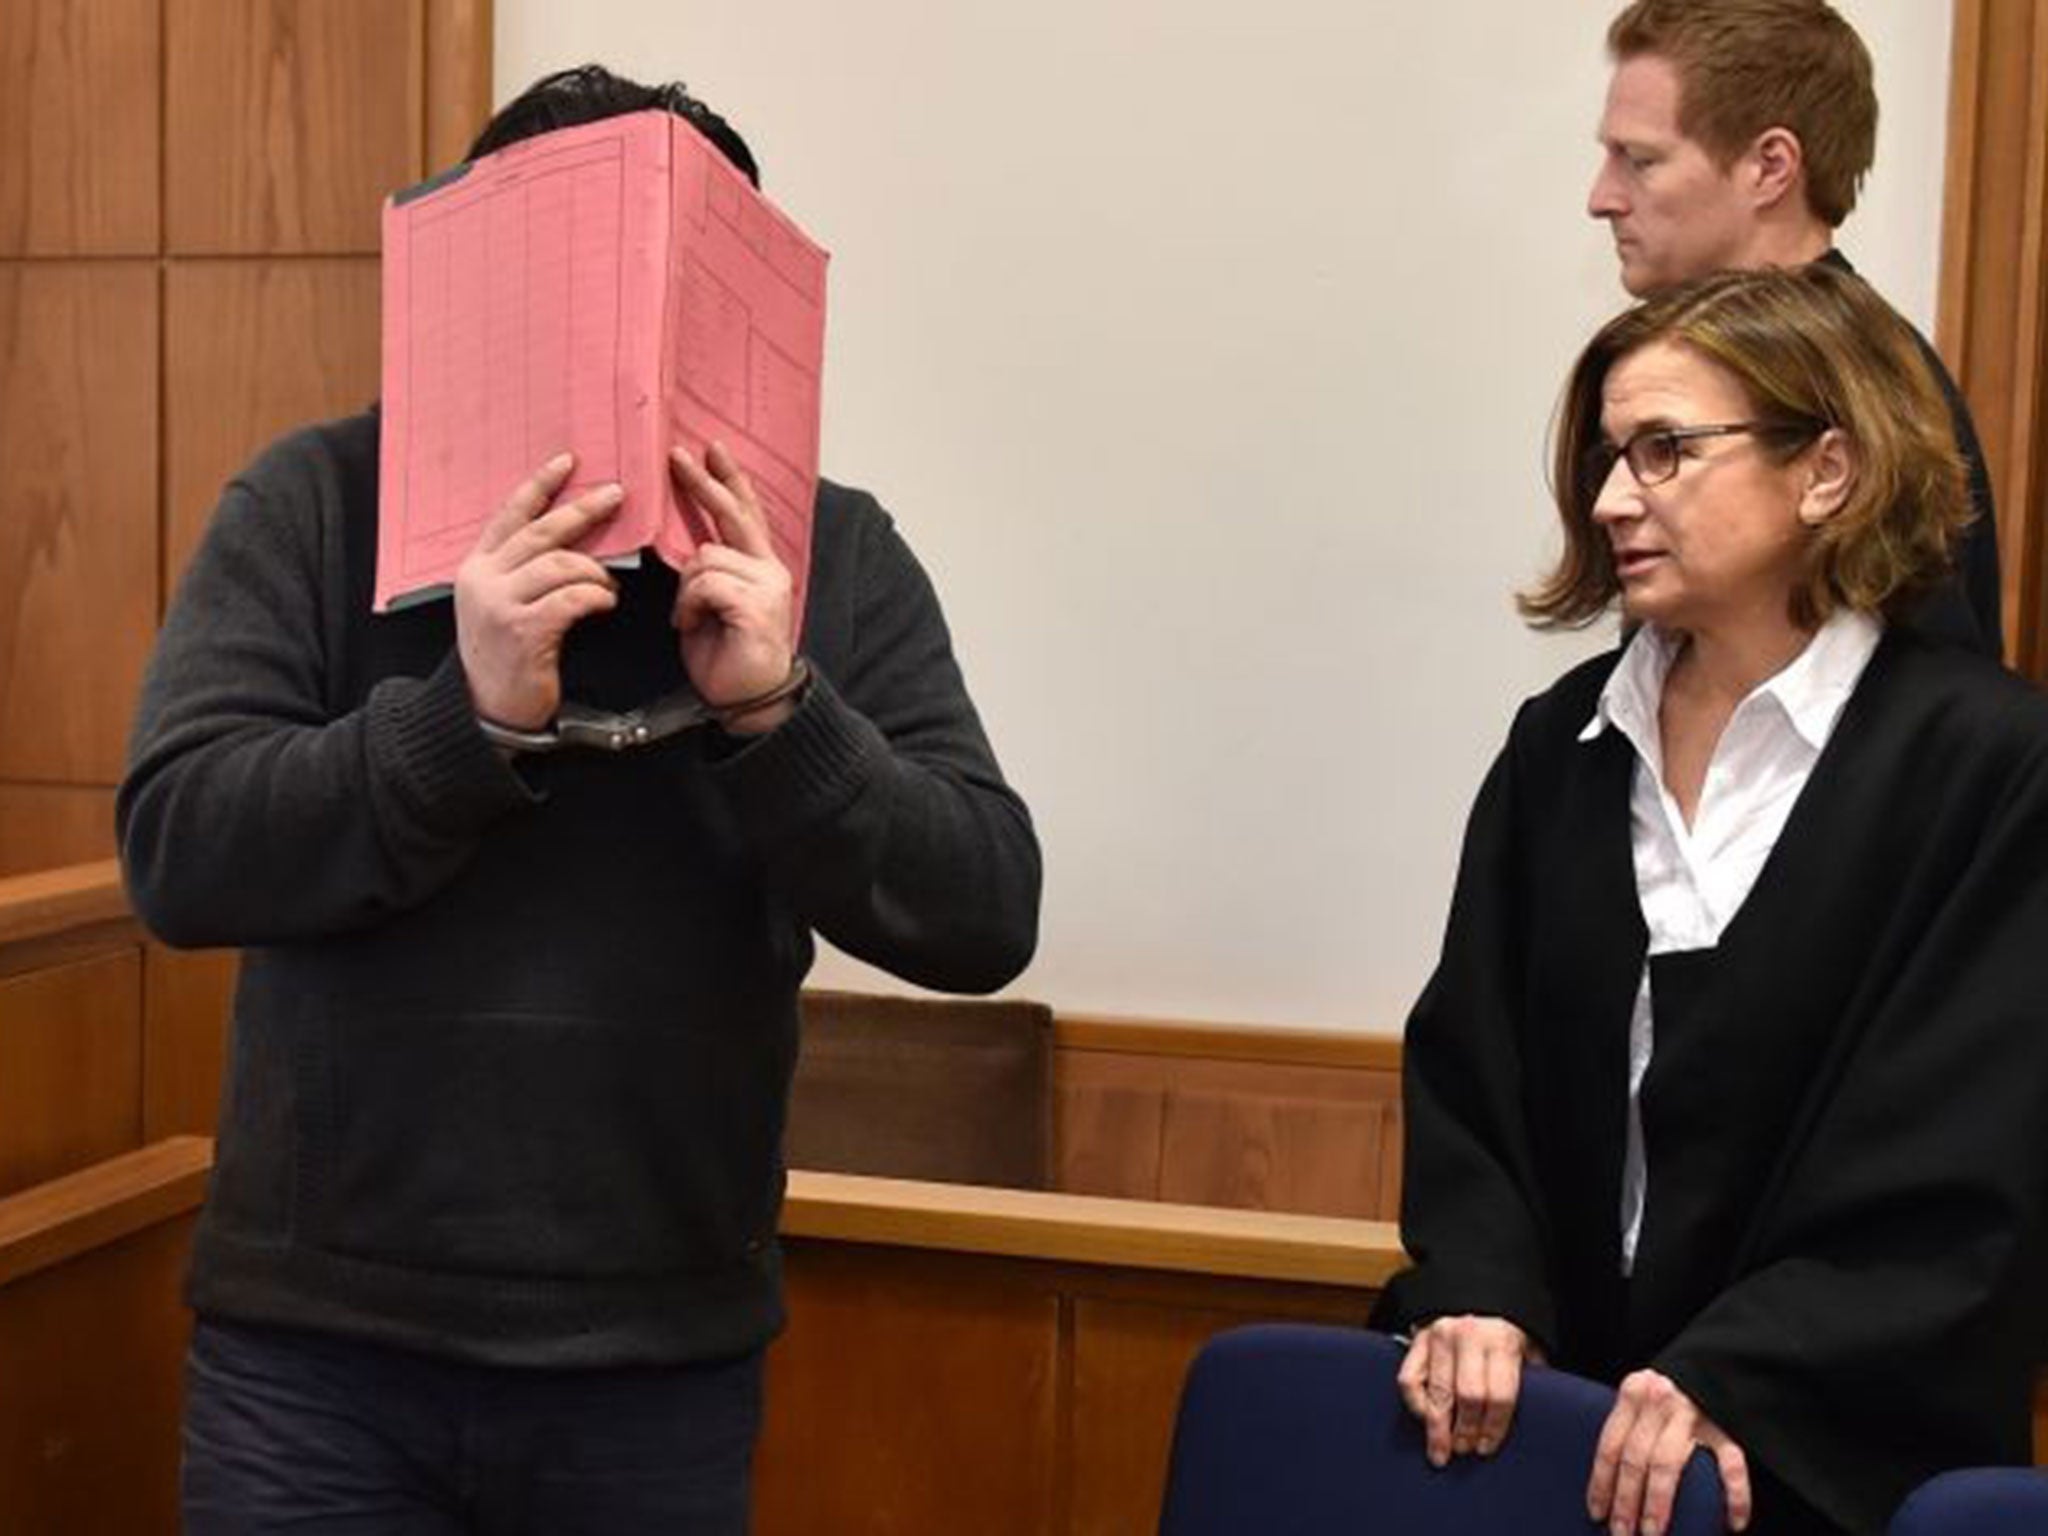 Former nurse, only identified as Niels H. hides his face behind a folder when arriving in the courtroom besides his lawyer Ulrike Baumann